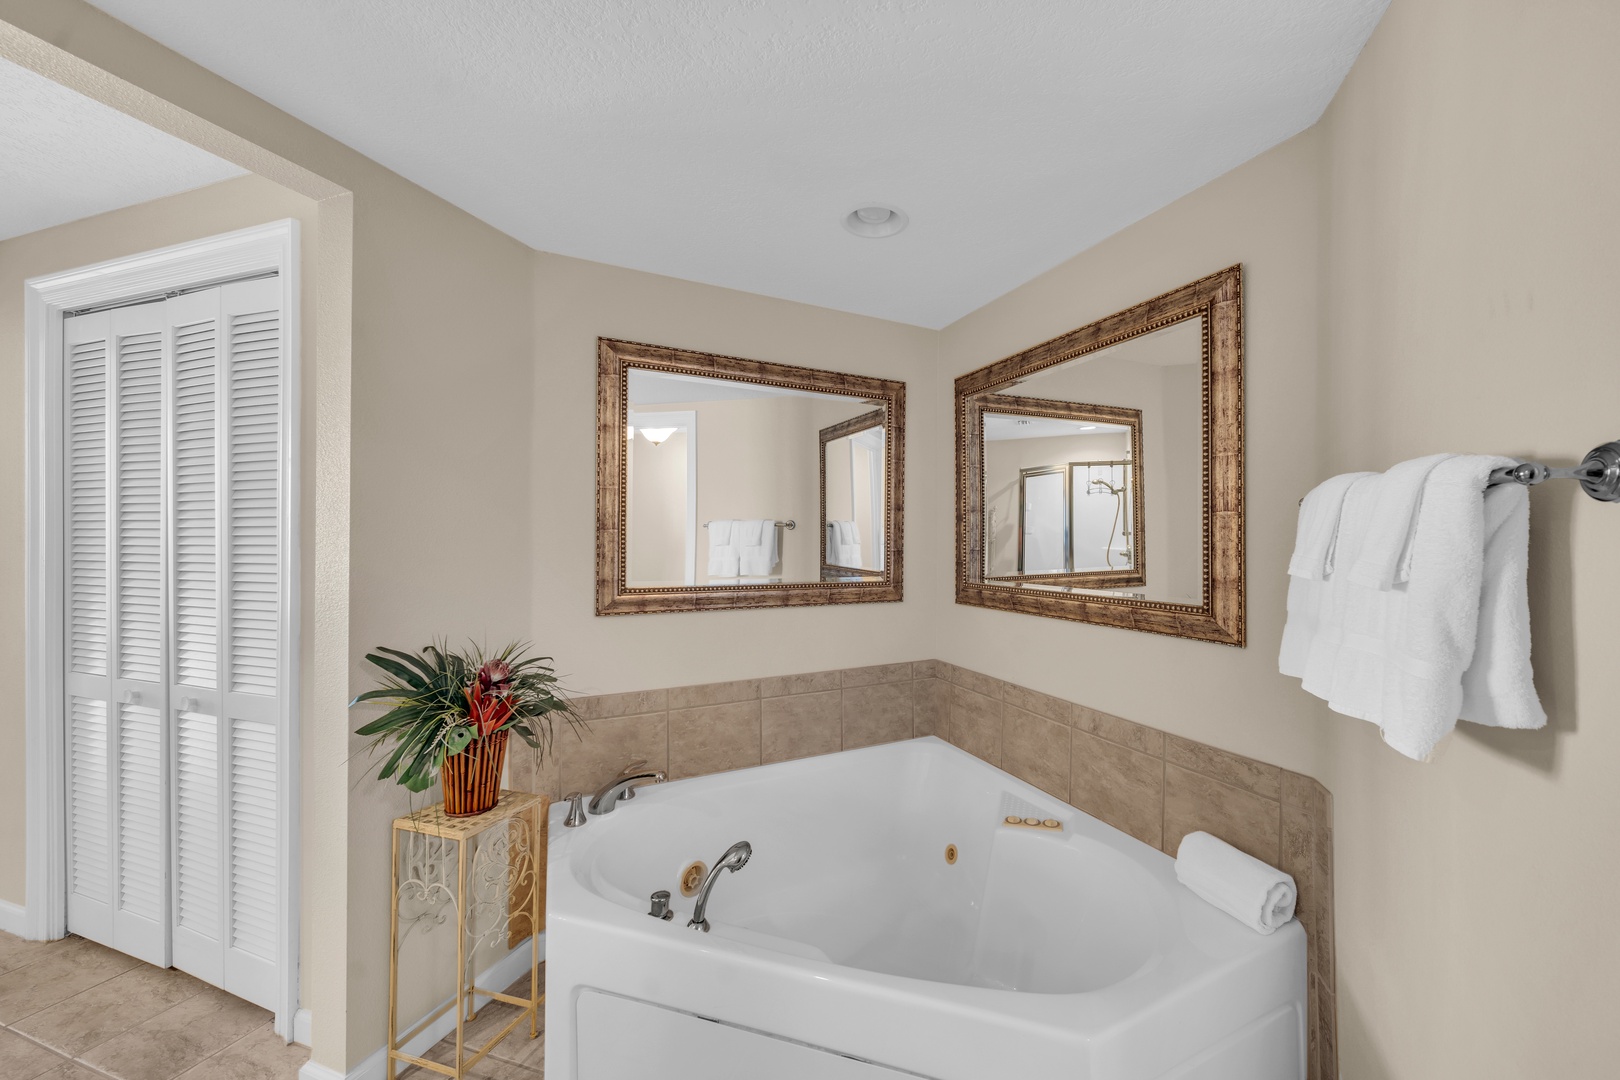 Primary bathroom with jetted bathtub